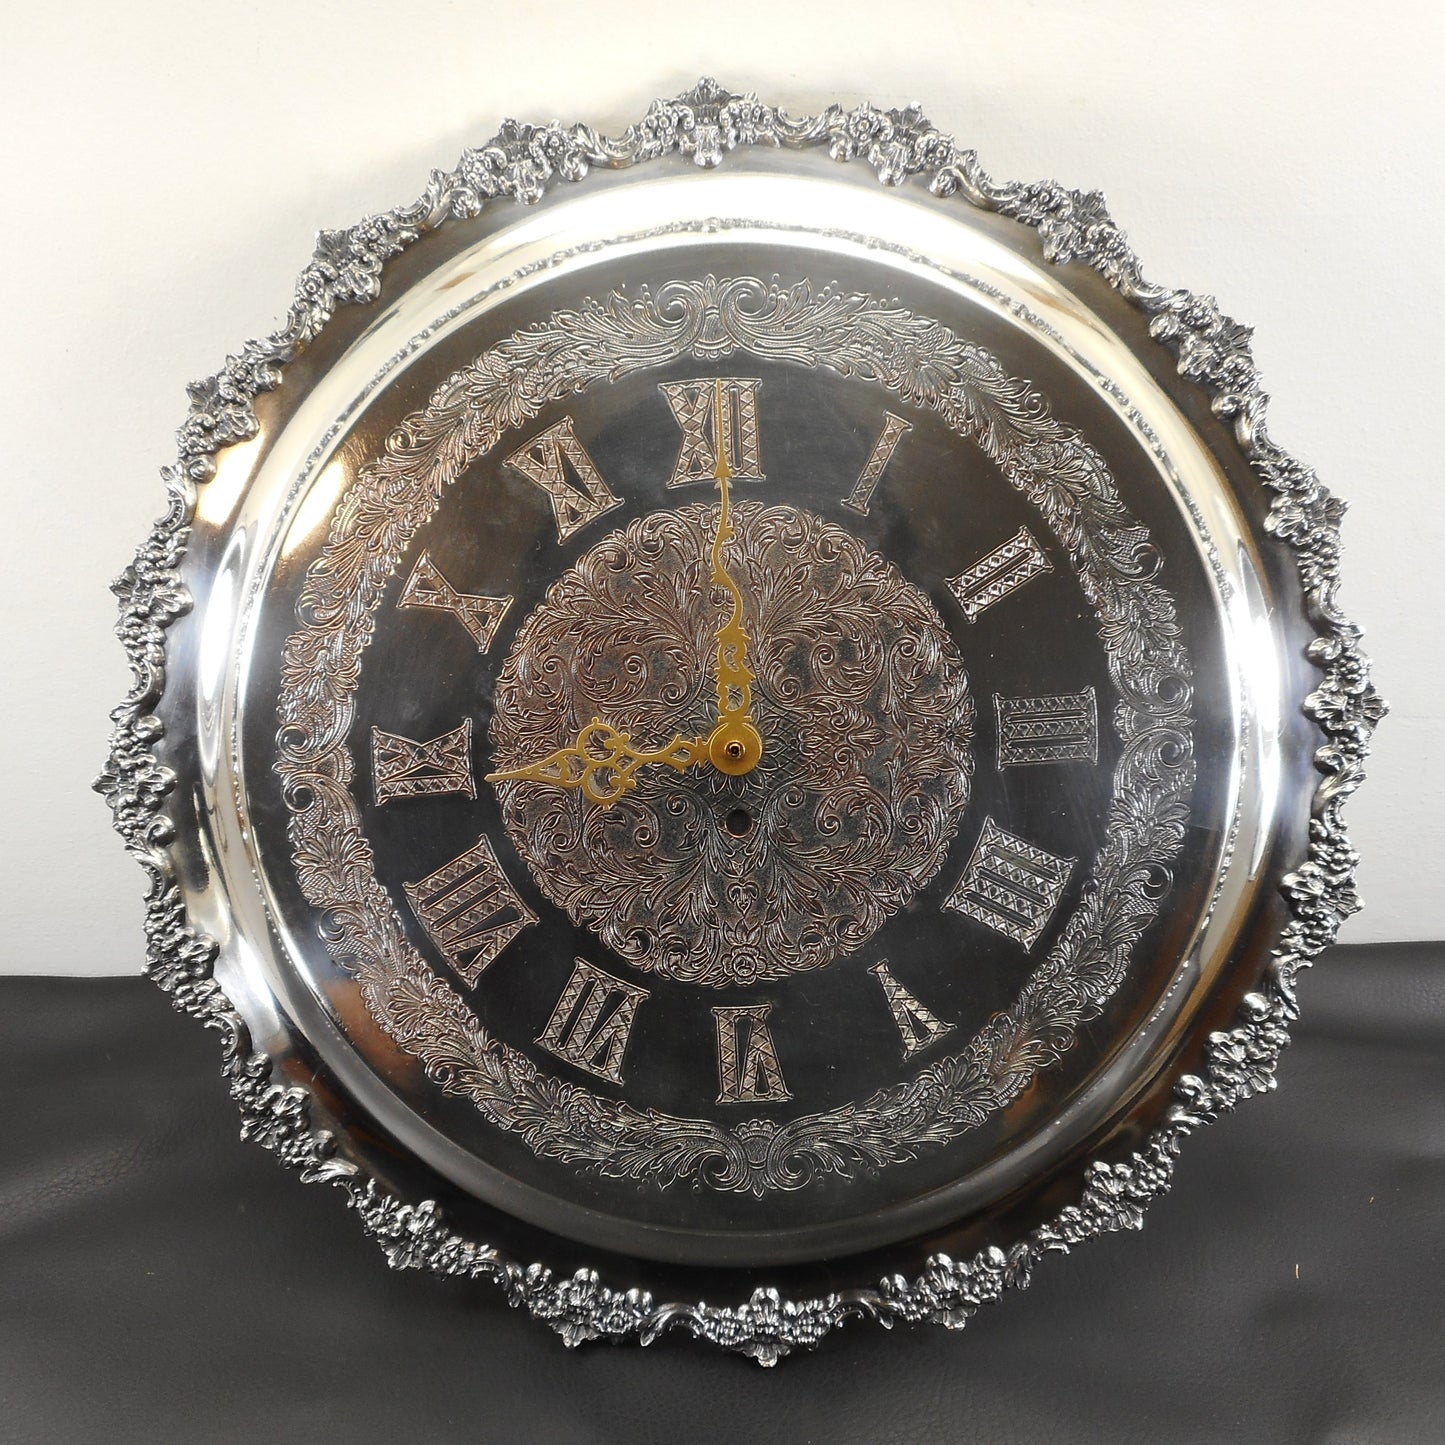 Unbranded Vintage Silver Plate Engraved 16.5" Wall Clock Ornate Roman Numerals